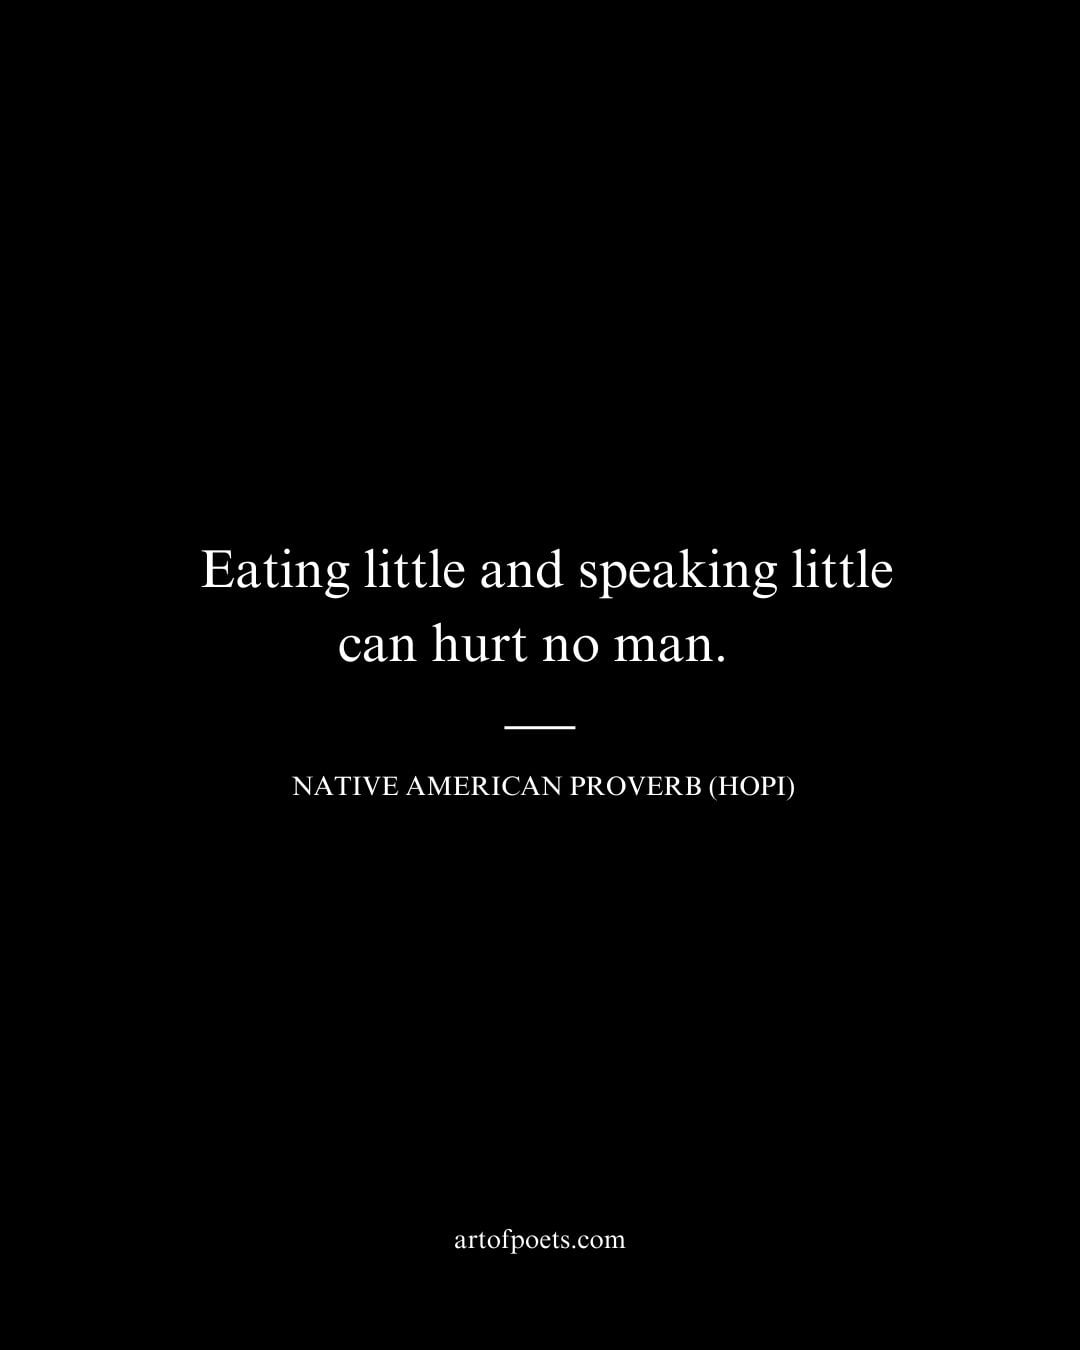 Eating little and speaking little can hurt no man